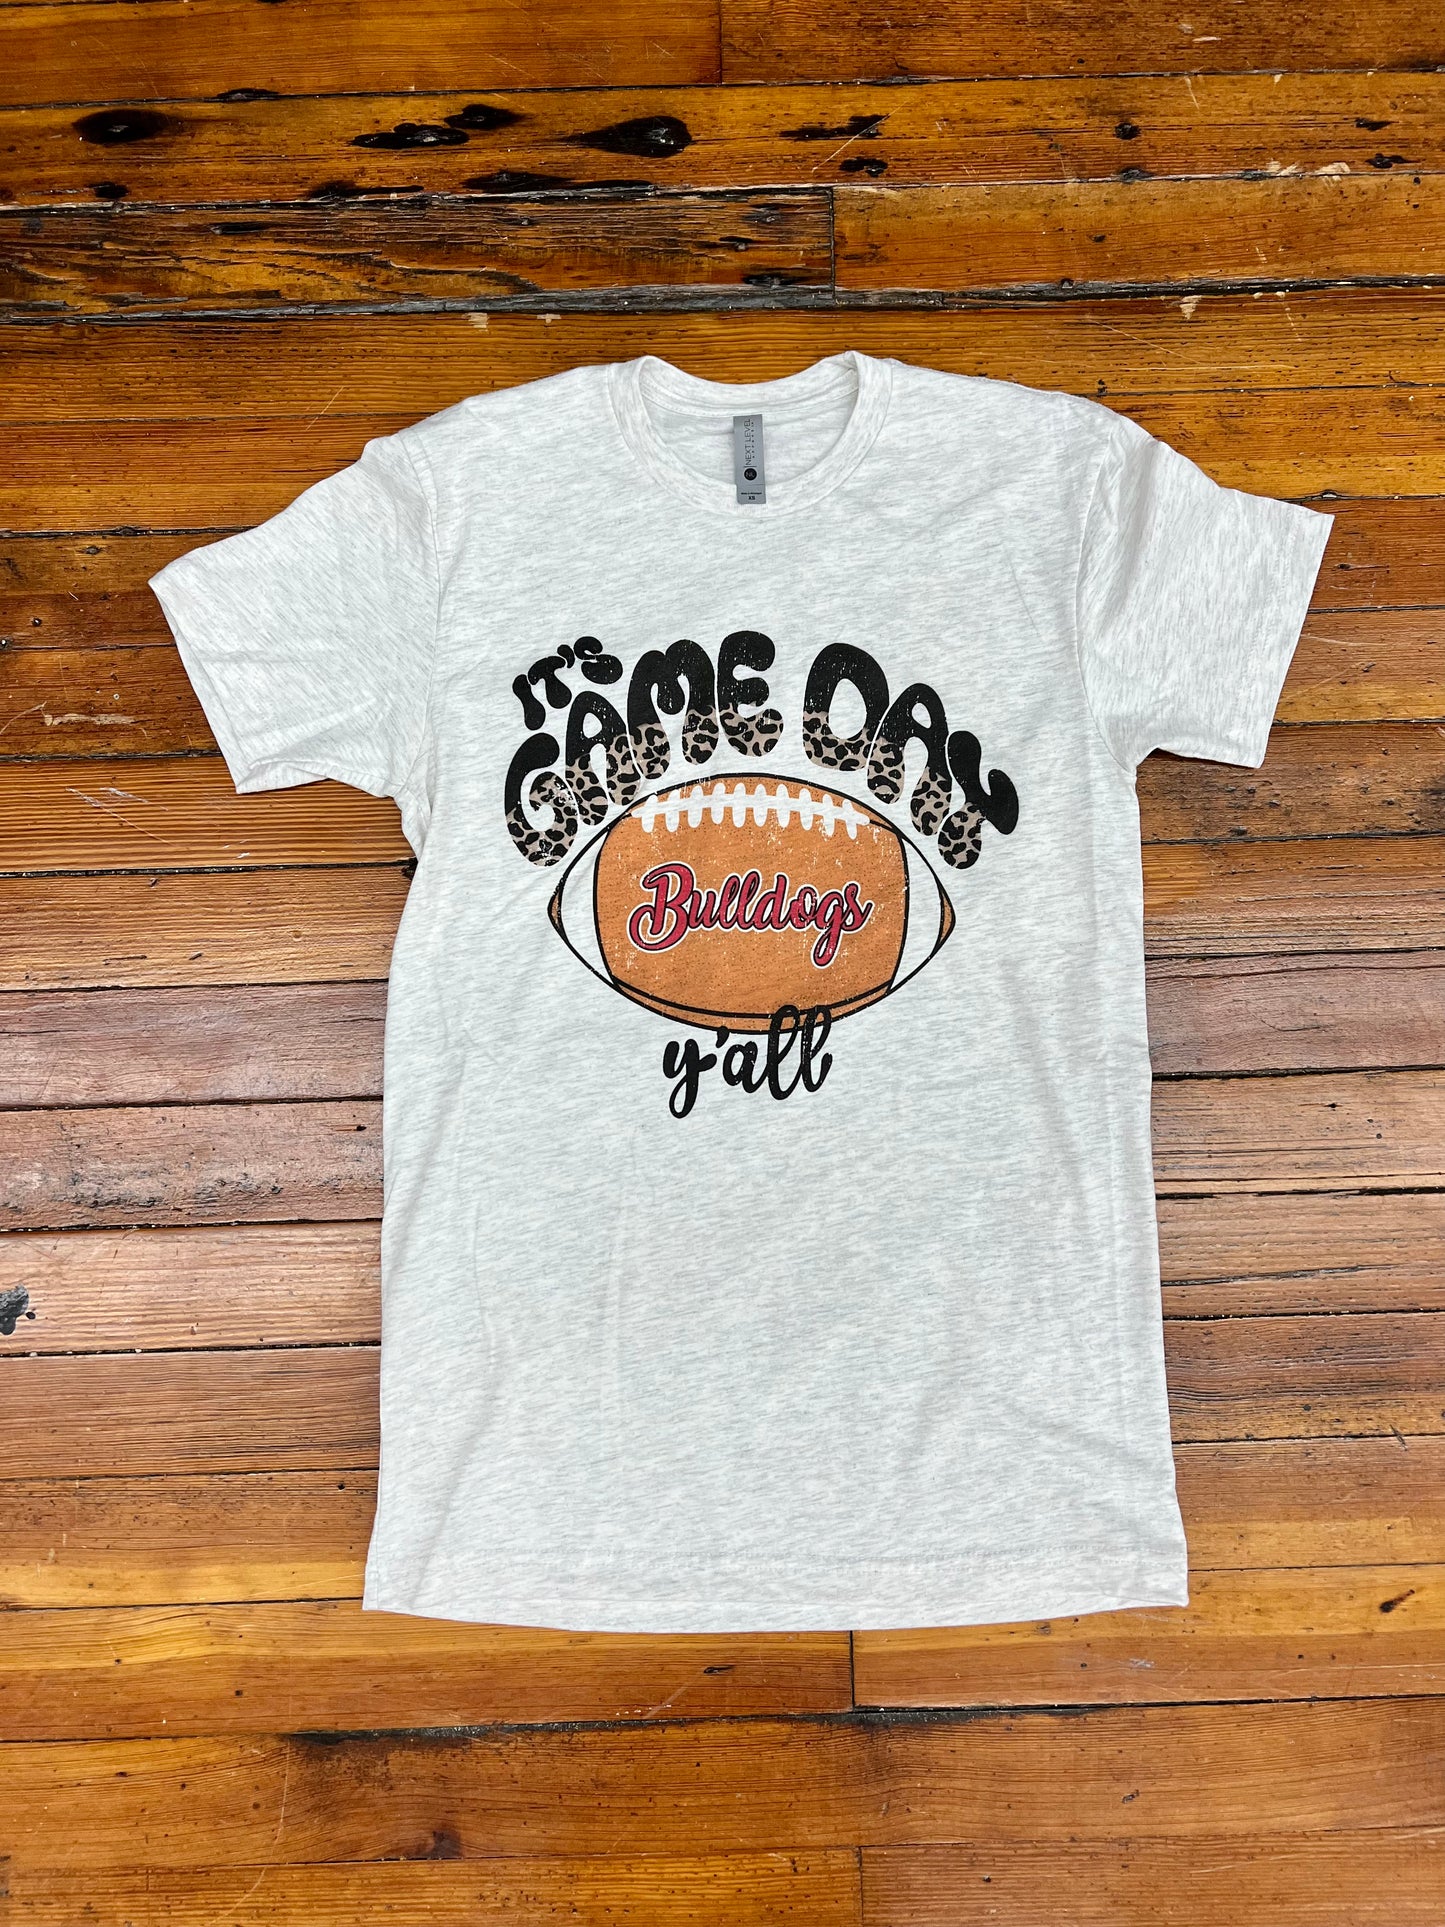 It's Game Day Y'all Football Graphic Tee - Tigers